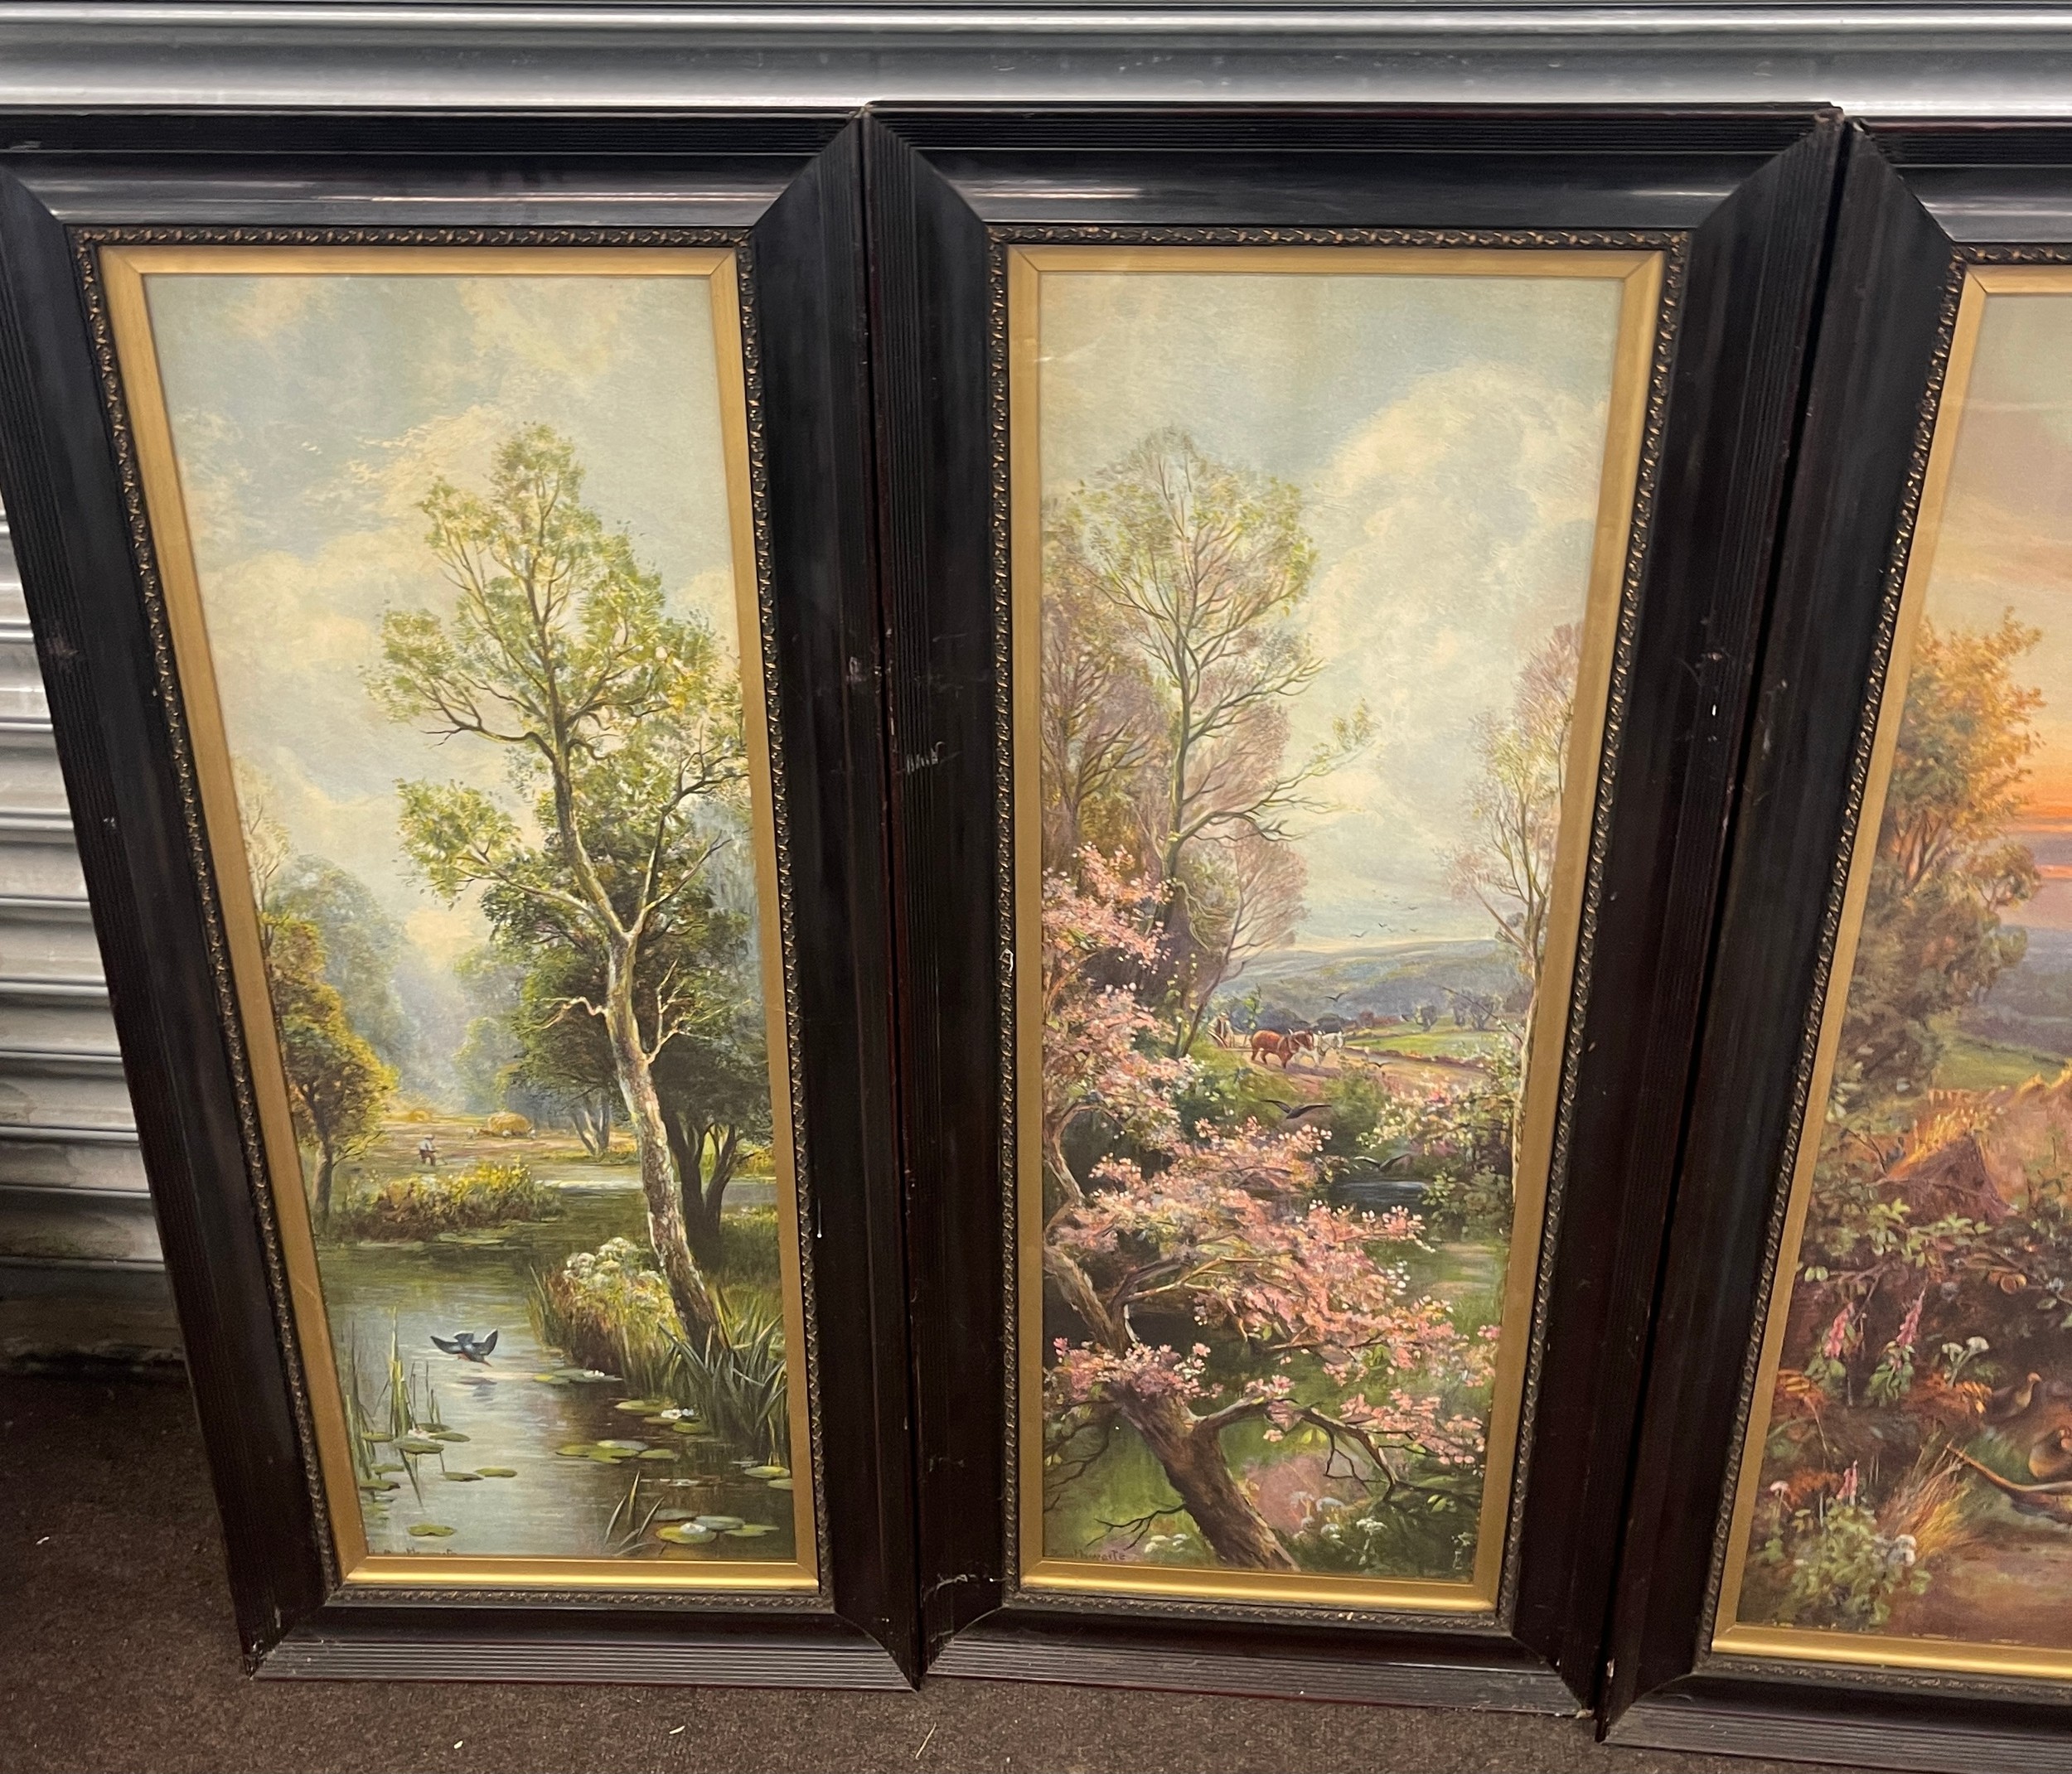 The 4 seasons antique framed prints, approximate measurements: Height 40 inches, Width 8 inches - Bild 2 aus 3